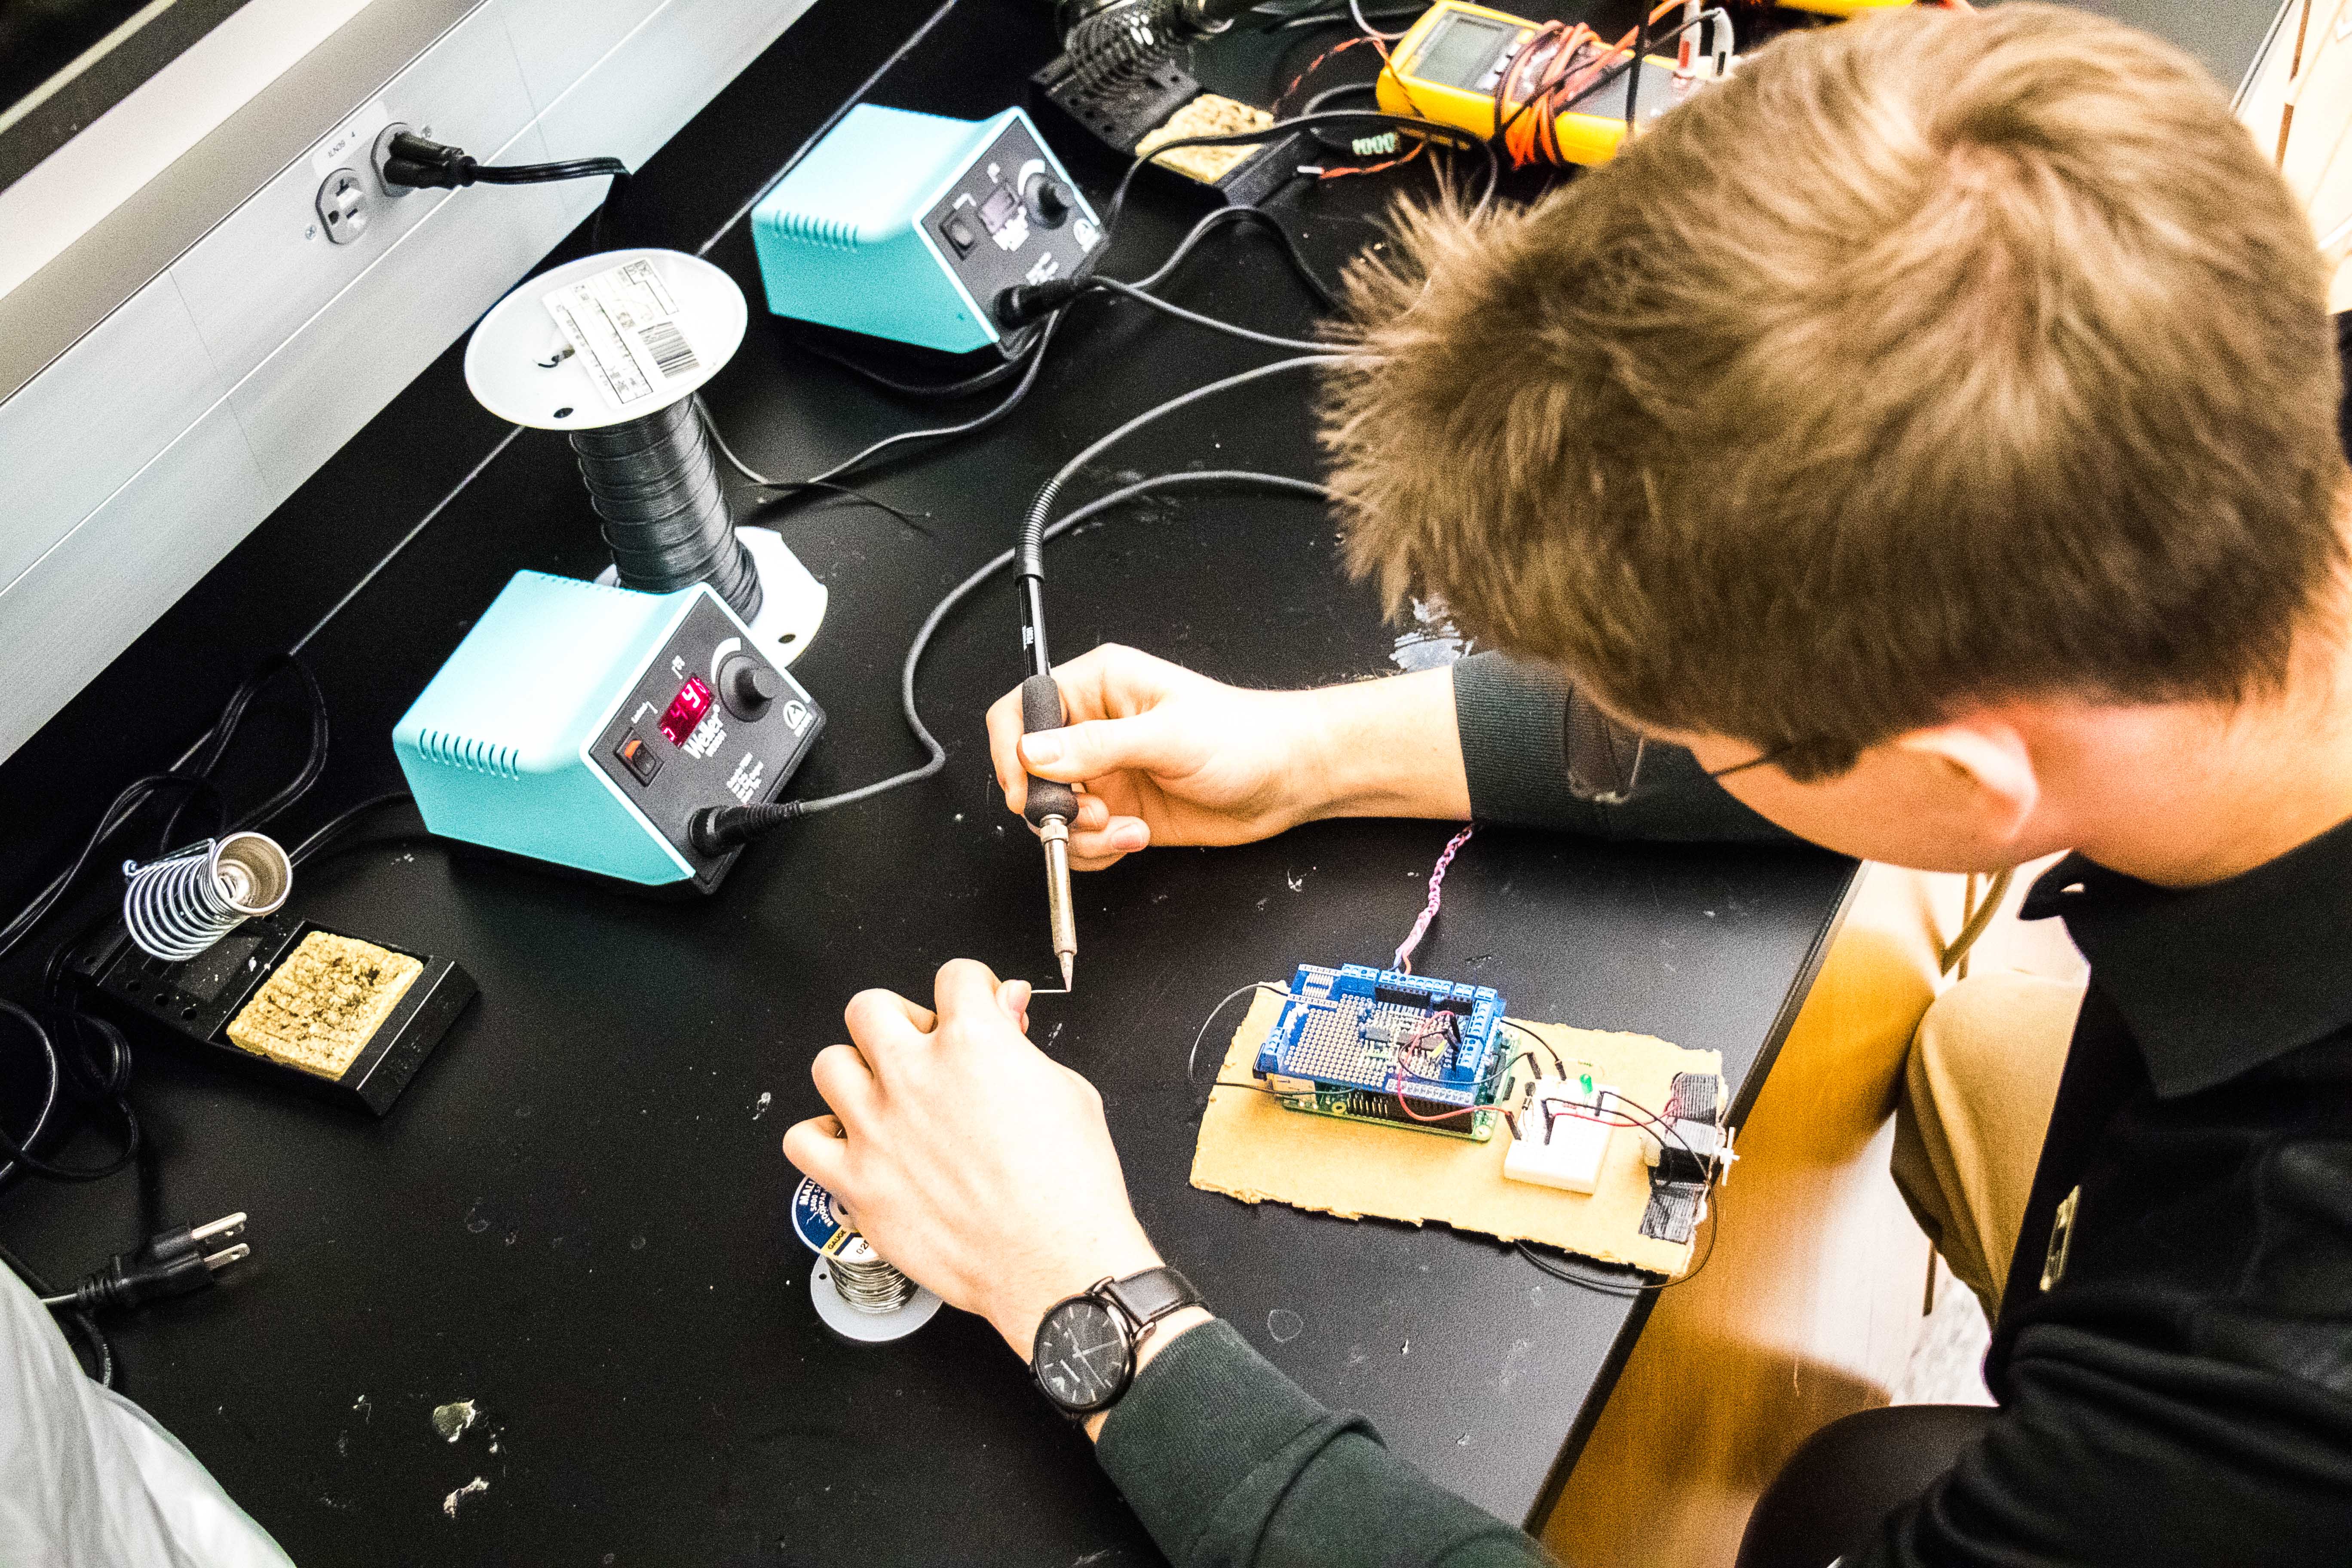 student soldering in the lab